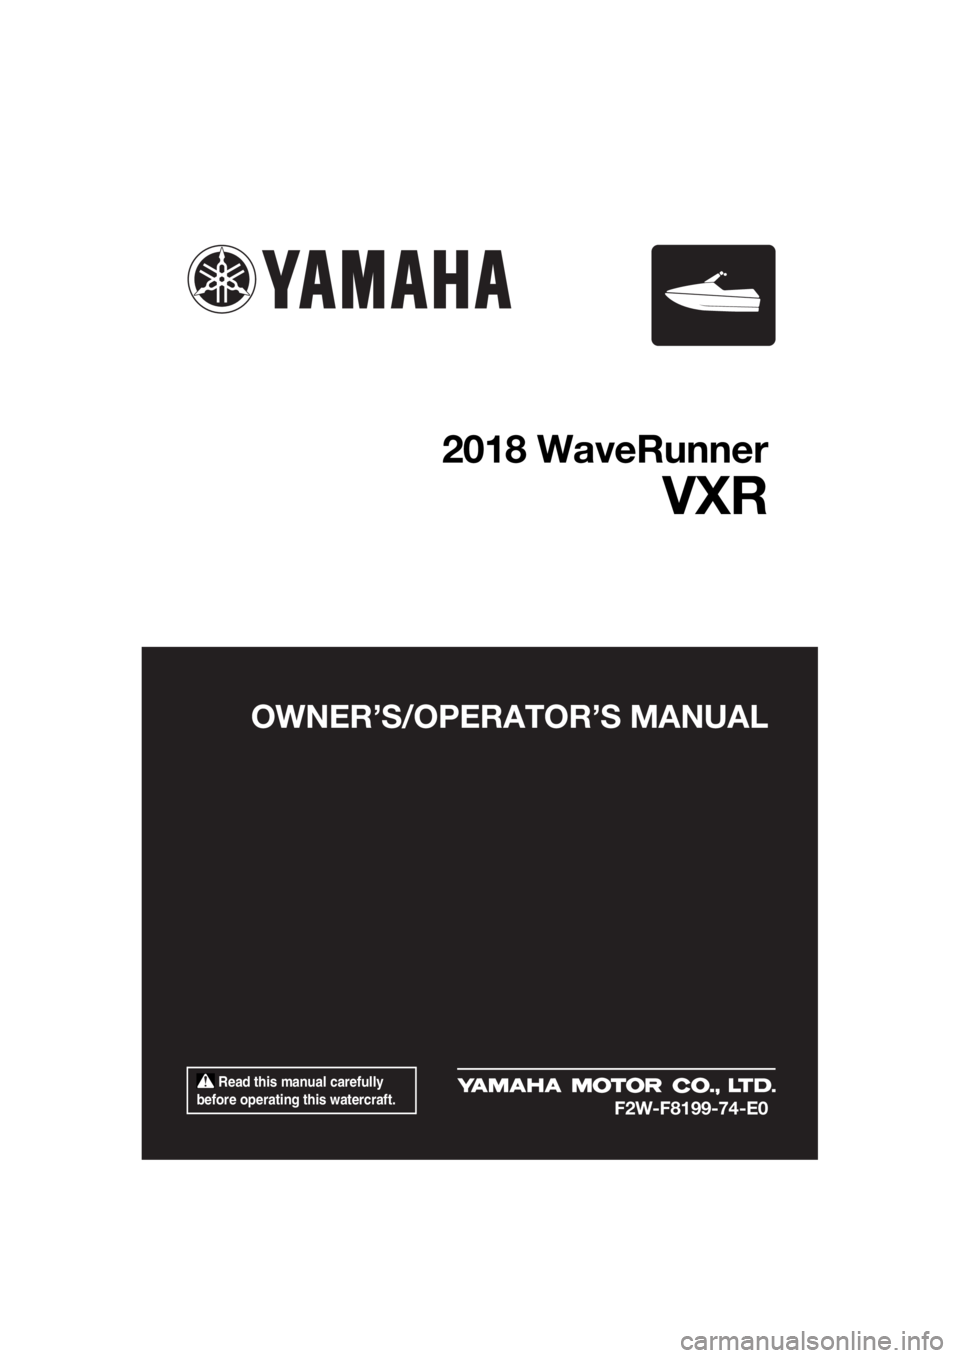 YAMAHA VXR 2018  Owners Manual  Read this manual carefully 
before operating this watercraft.
OWNER’S/OPERATOR’S MANUAL
2018 WaveRunner
VXR
F2W-F8199-74-E0
UF2W74E0.book  Page 1  Thursday, July 6, 2017  3:49 PM 